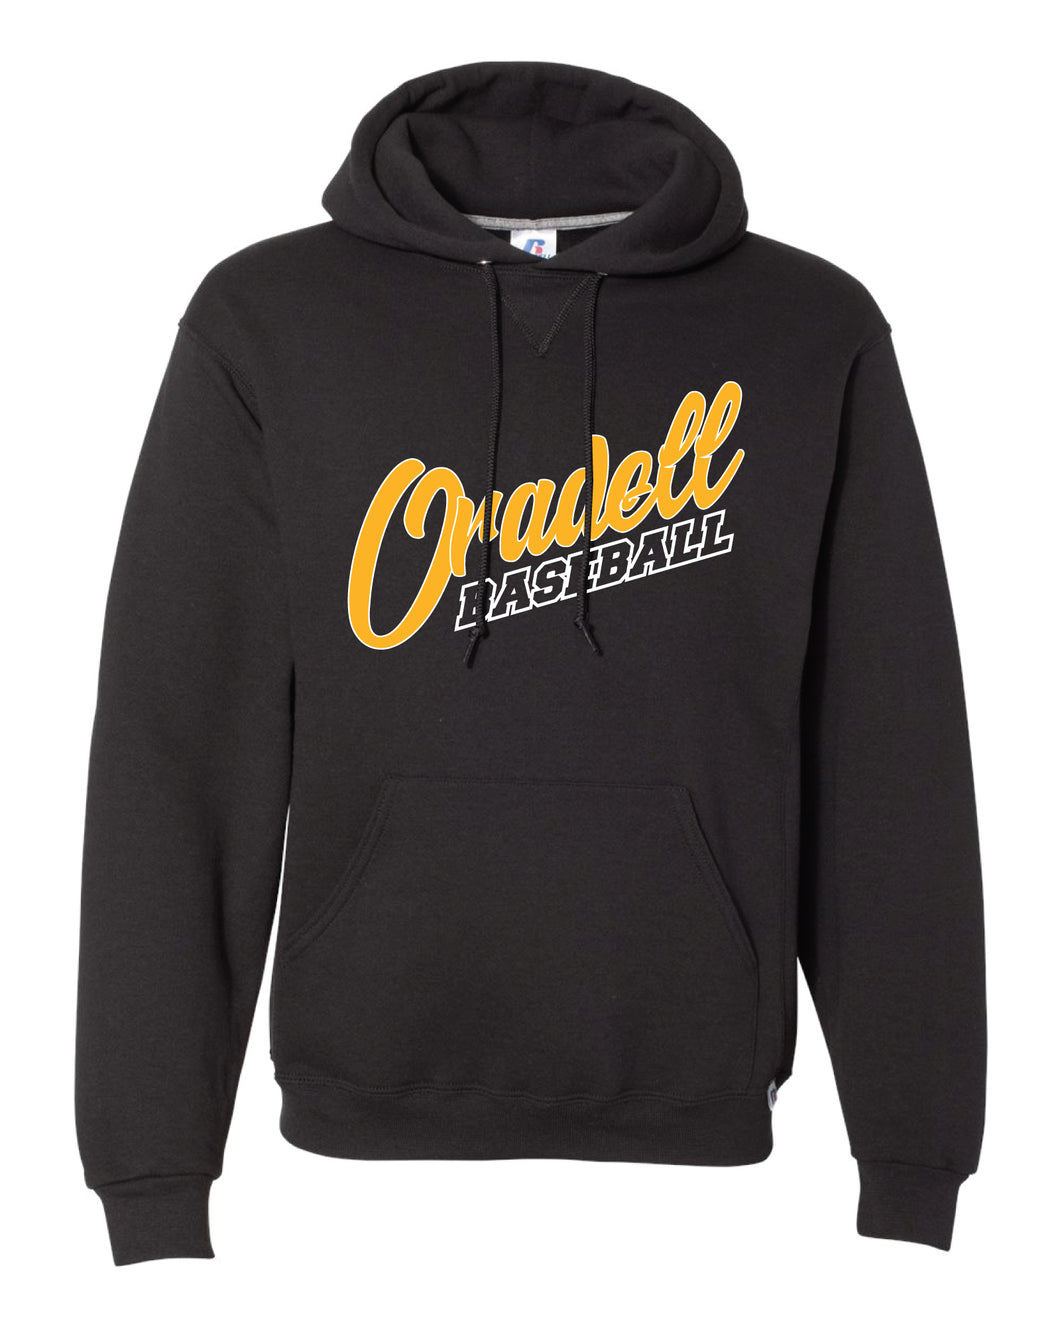 Oradell Baseball Russell Athletic Cotton Hoodie - Black